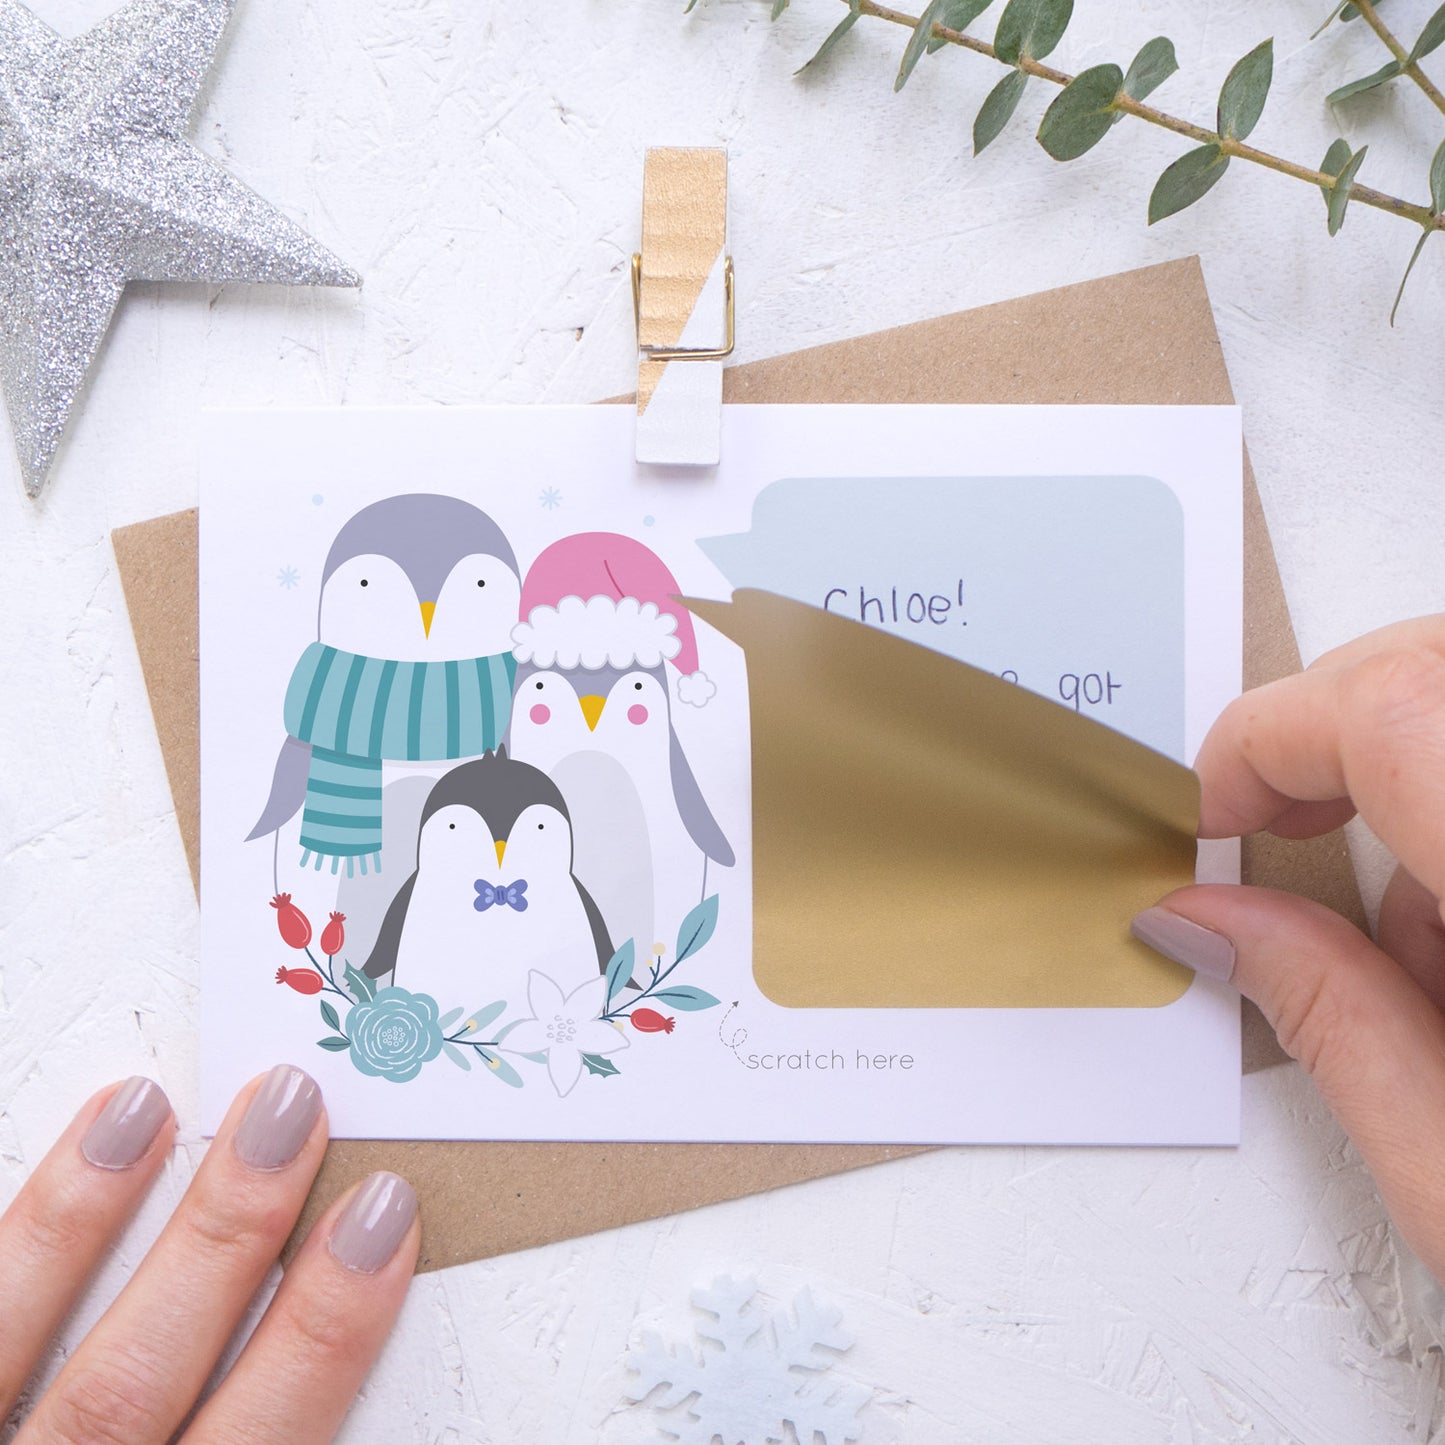 A personalised penguin family scratch card where the sticking down of the gold scratch panel is being demonstrated. Shot on a white background with a glittery star and sprig of eucalyptus.